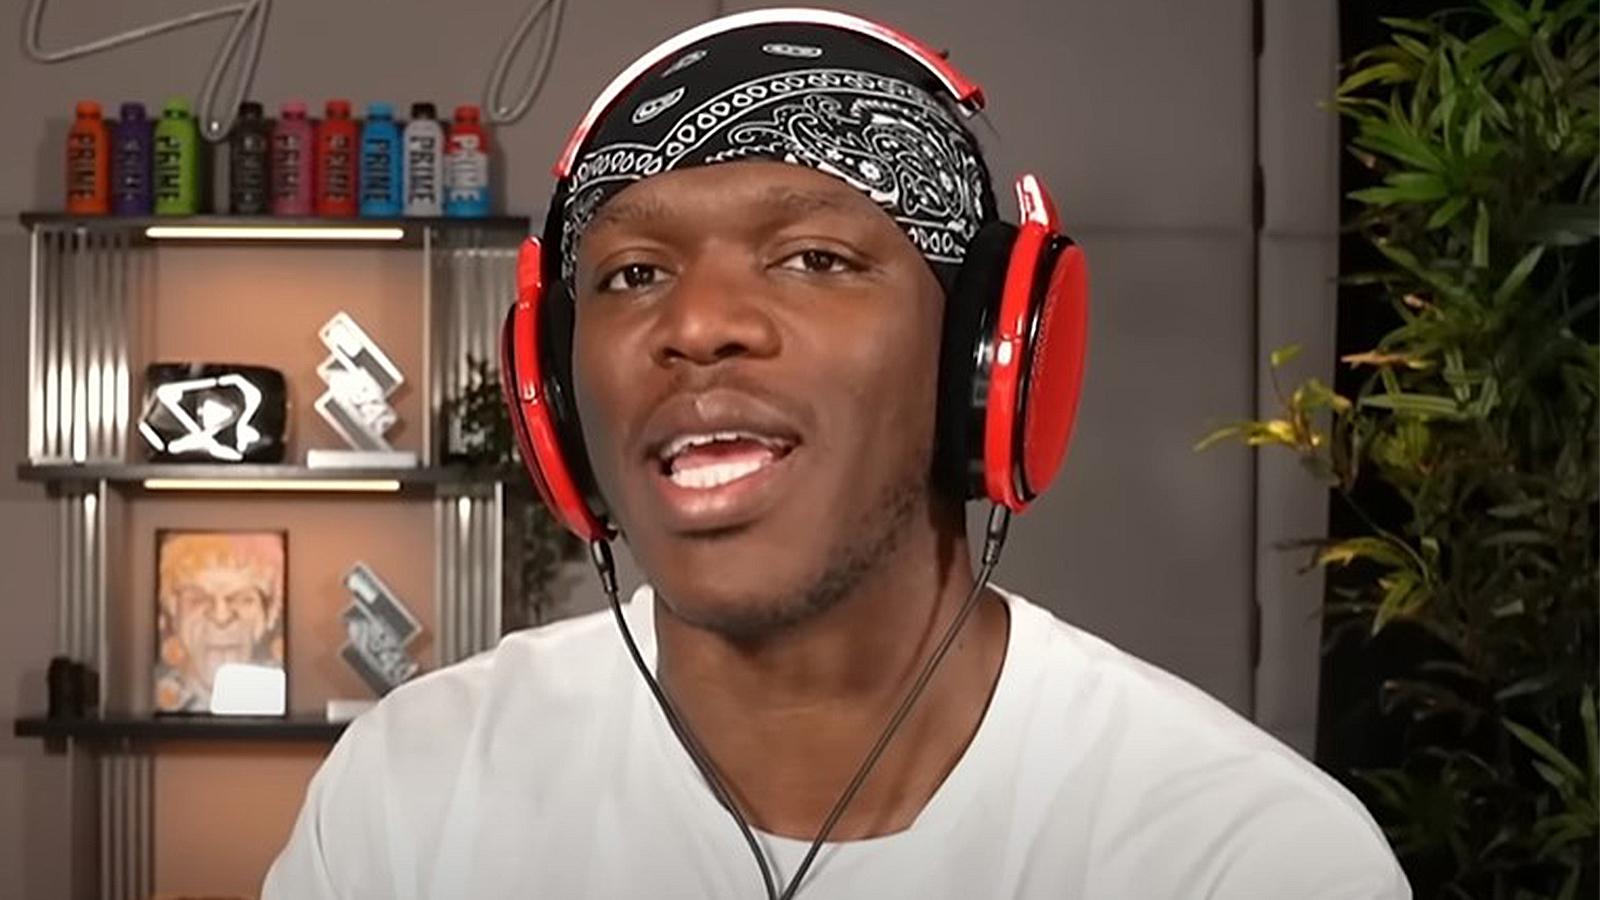 KSI responds to tag team rumors floyd mayweather manny pacquiao